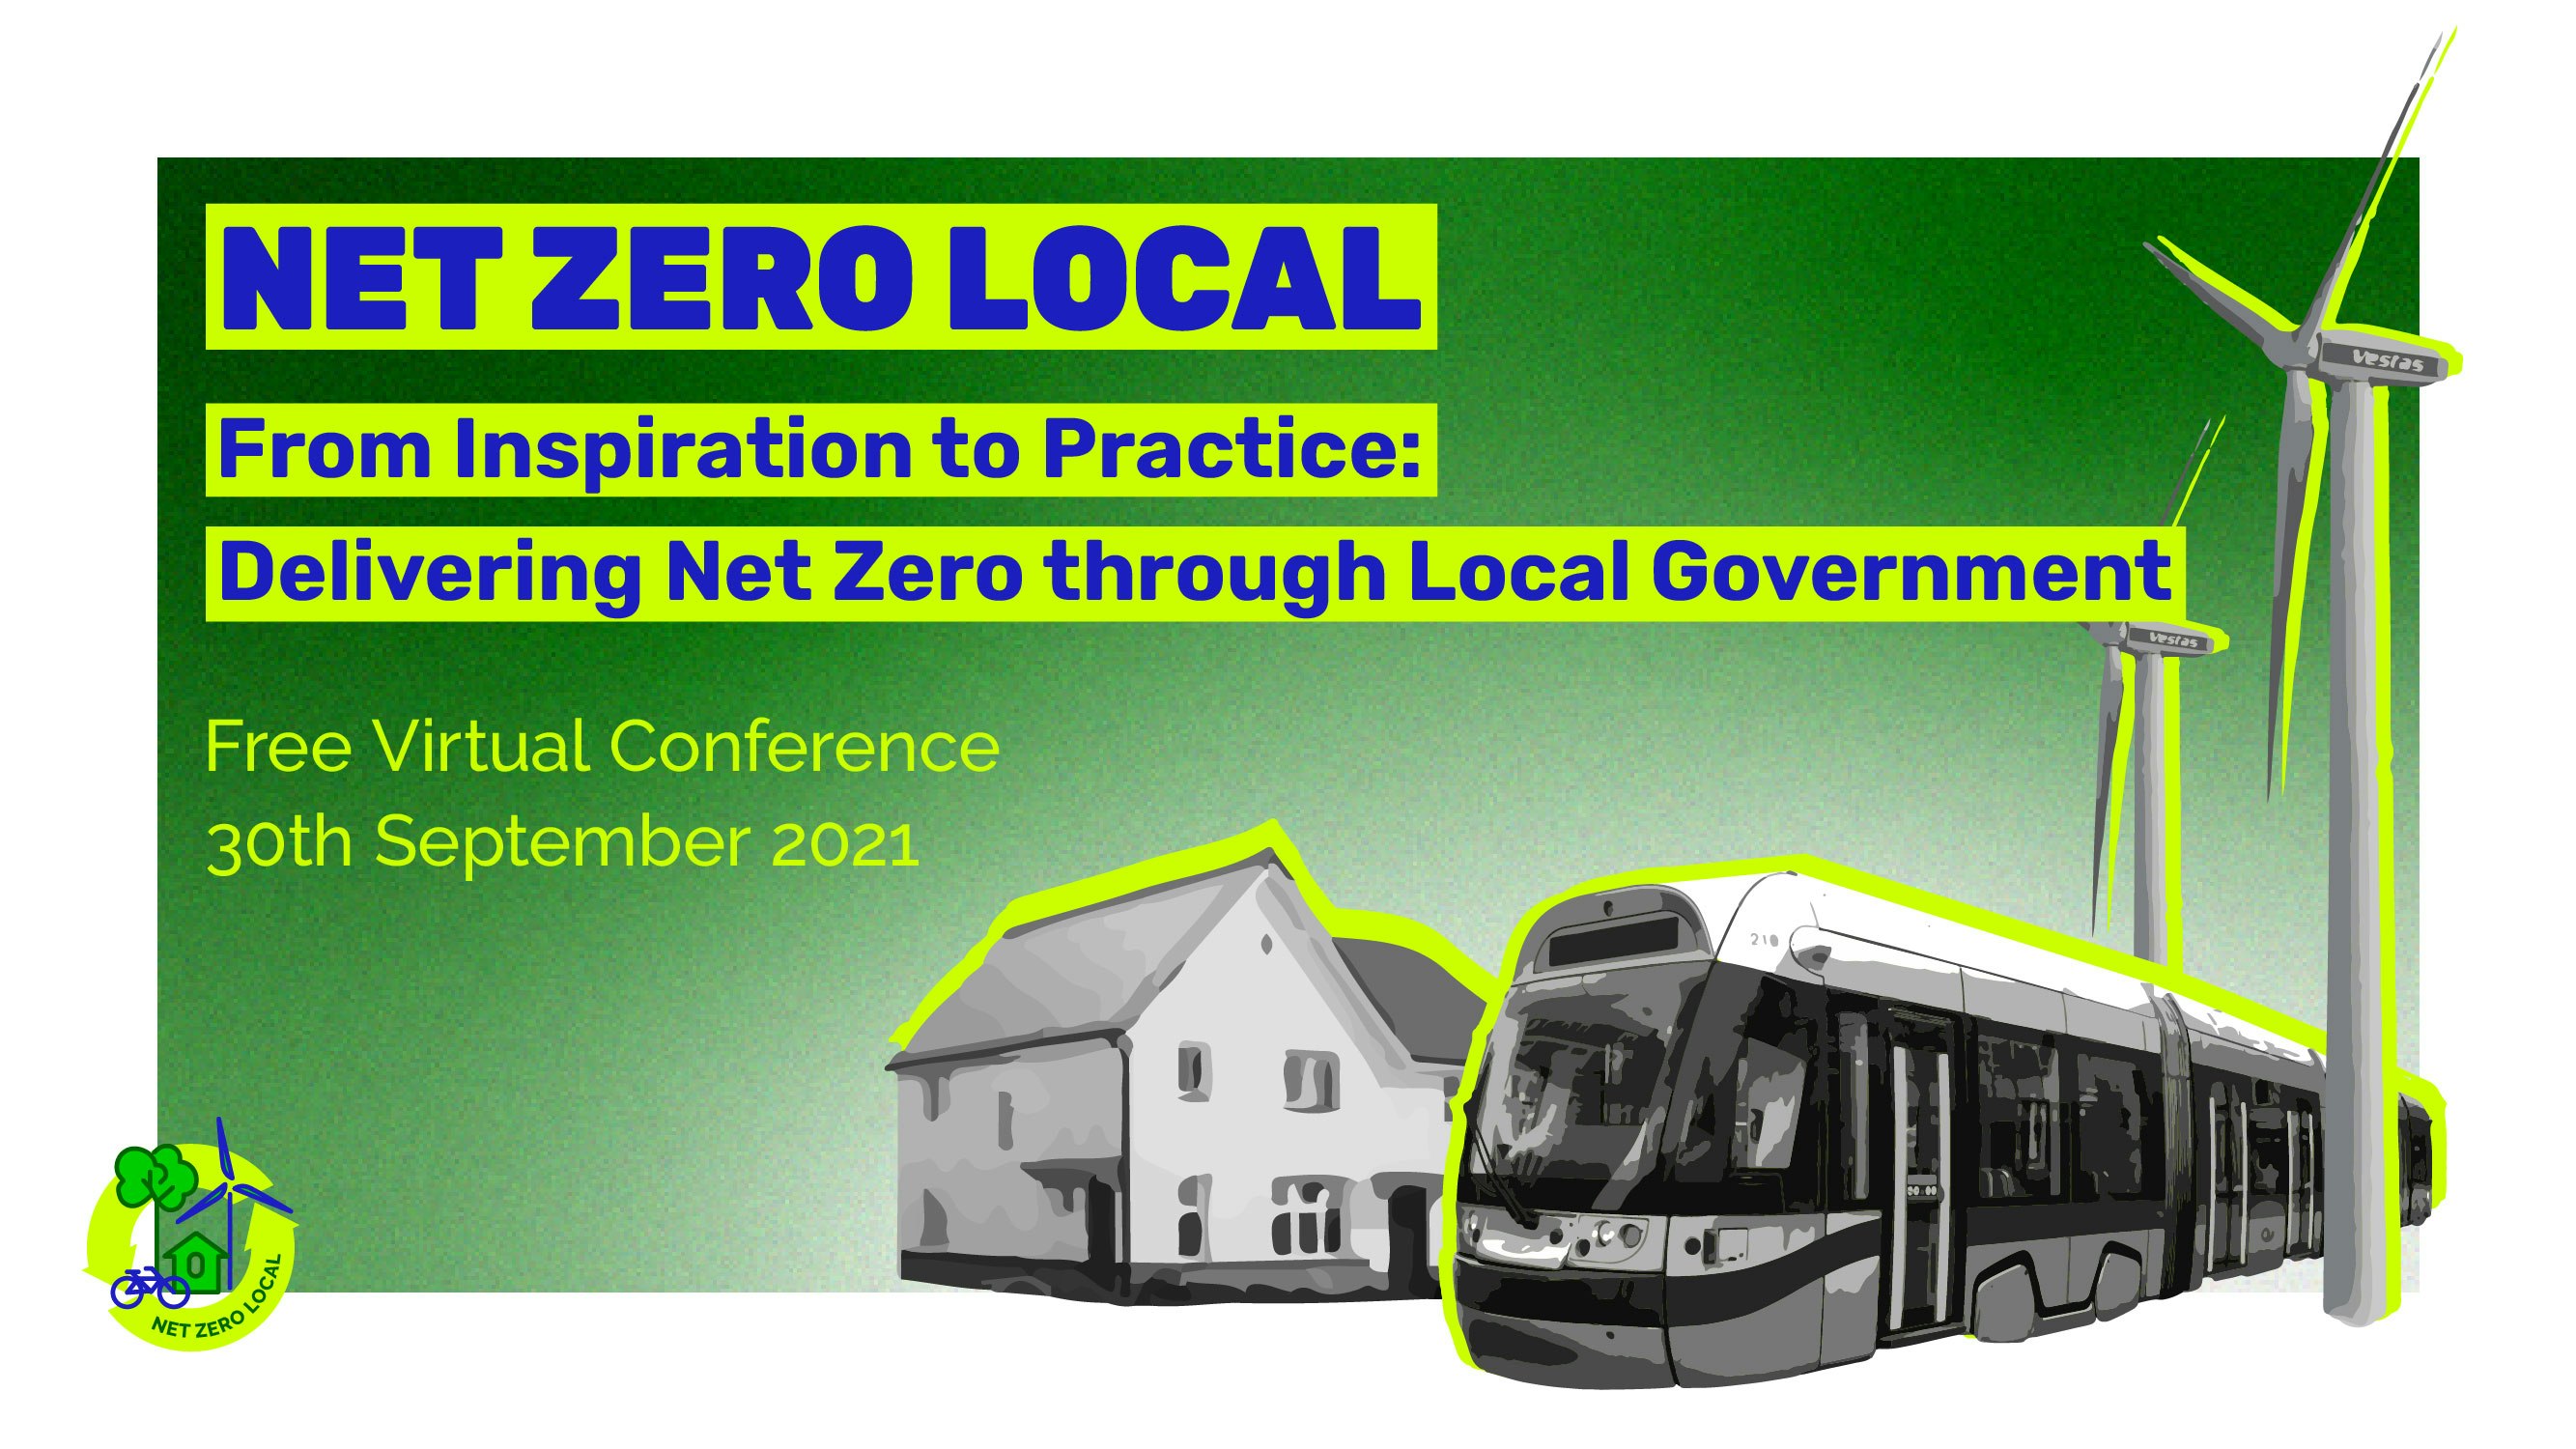 Net Zero Local Free Virtual Conference runs 30 September. Image shows wind turbines and an electric bus